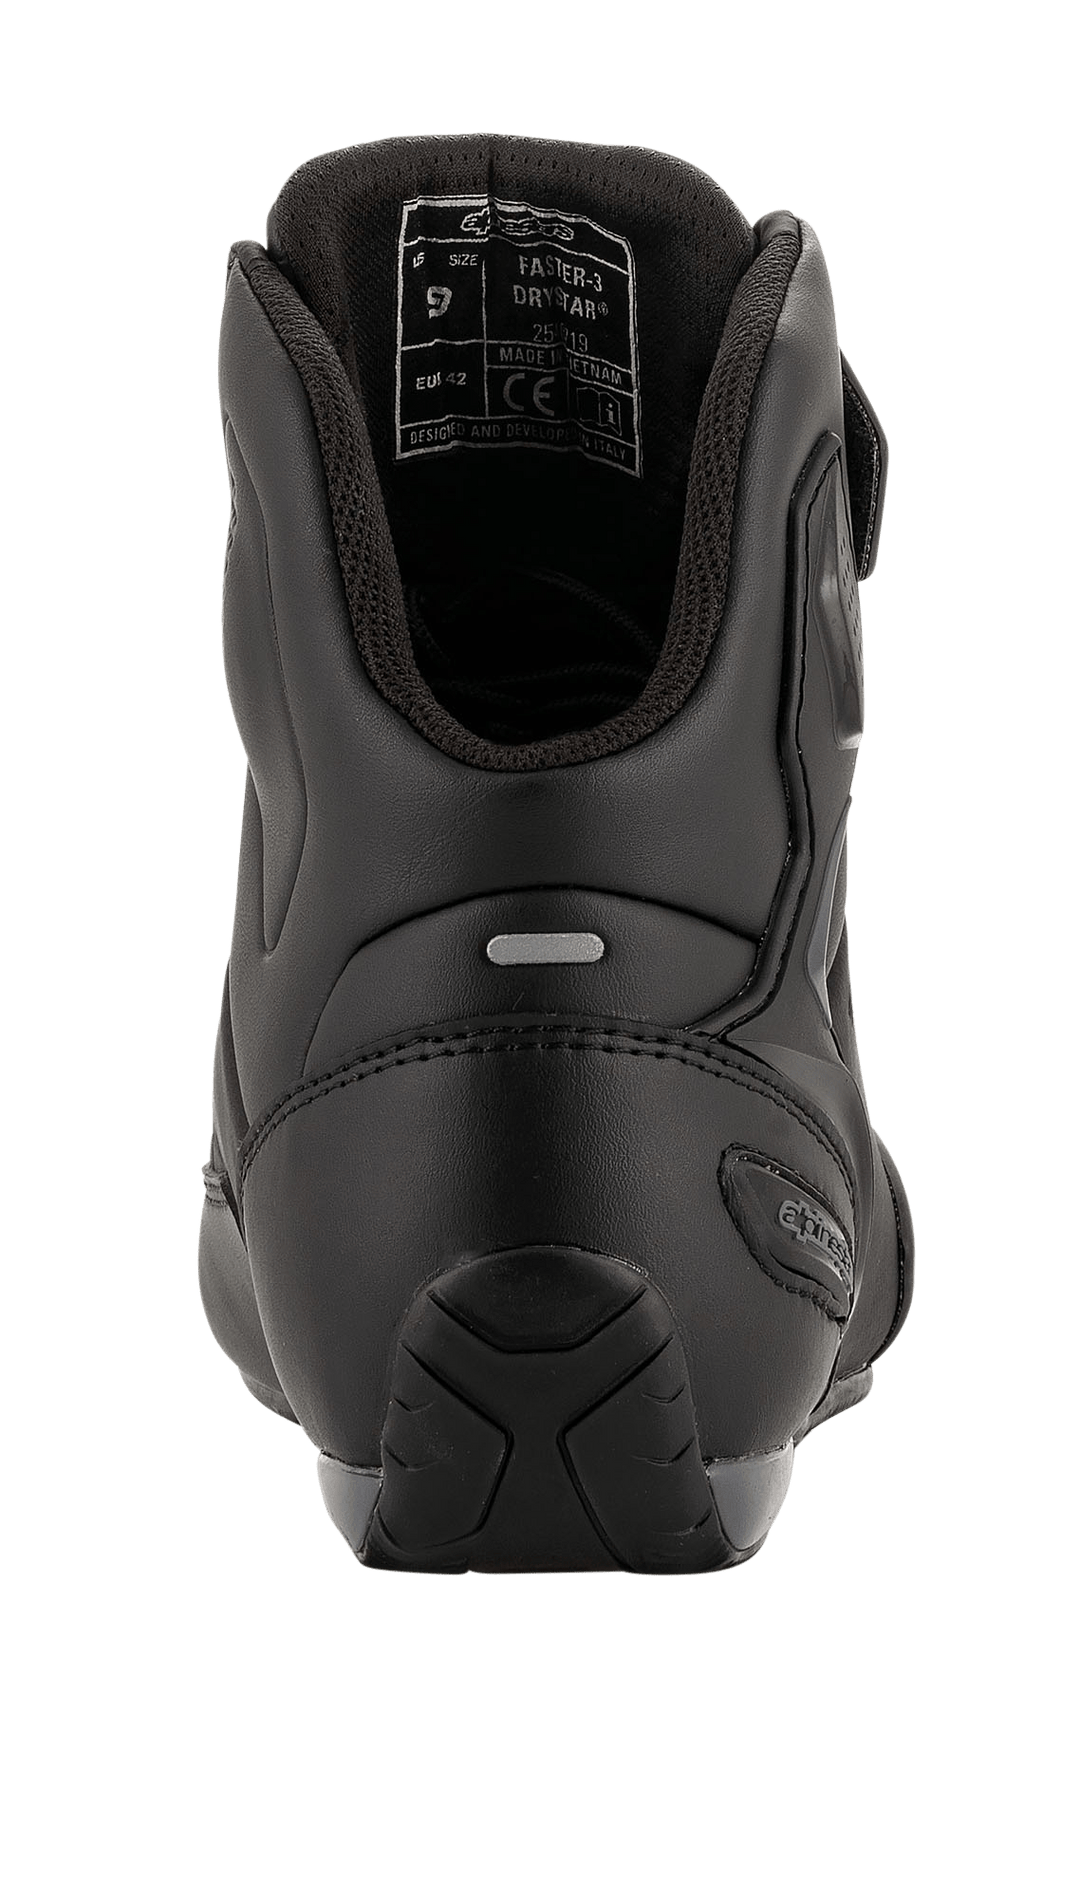 Faster-3 Drystar® Riding Shoes